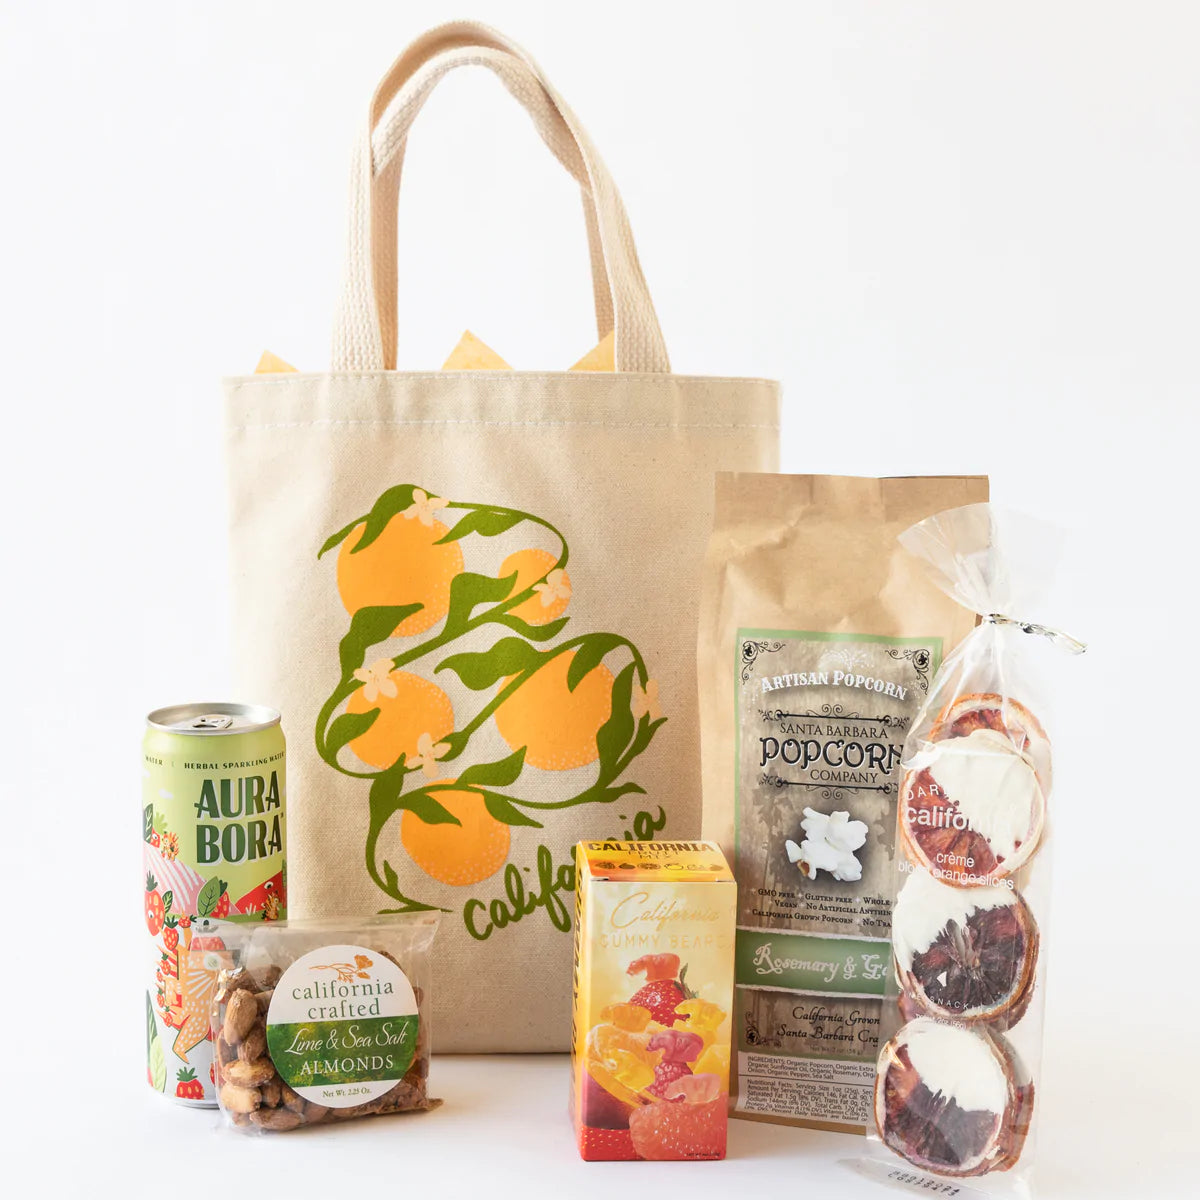 Tote bag with oranges and the word California, containing popcorn, gummy bears, almonds, dried oranges and a drink